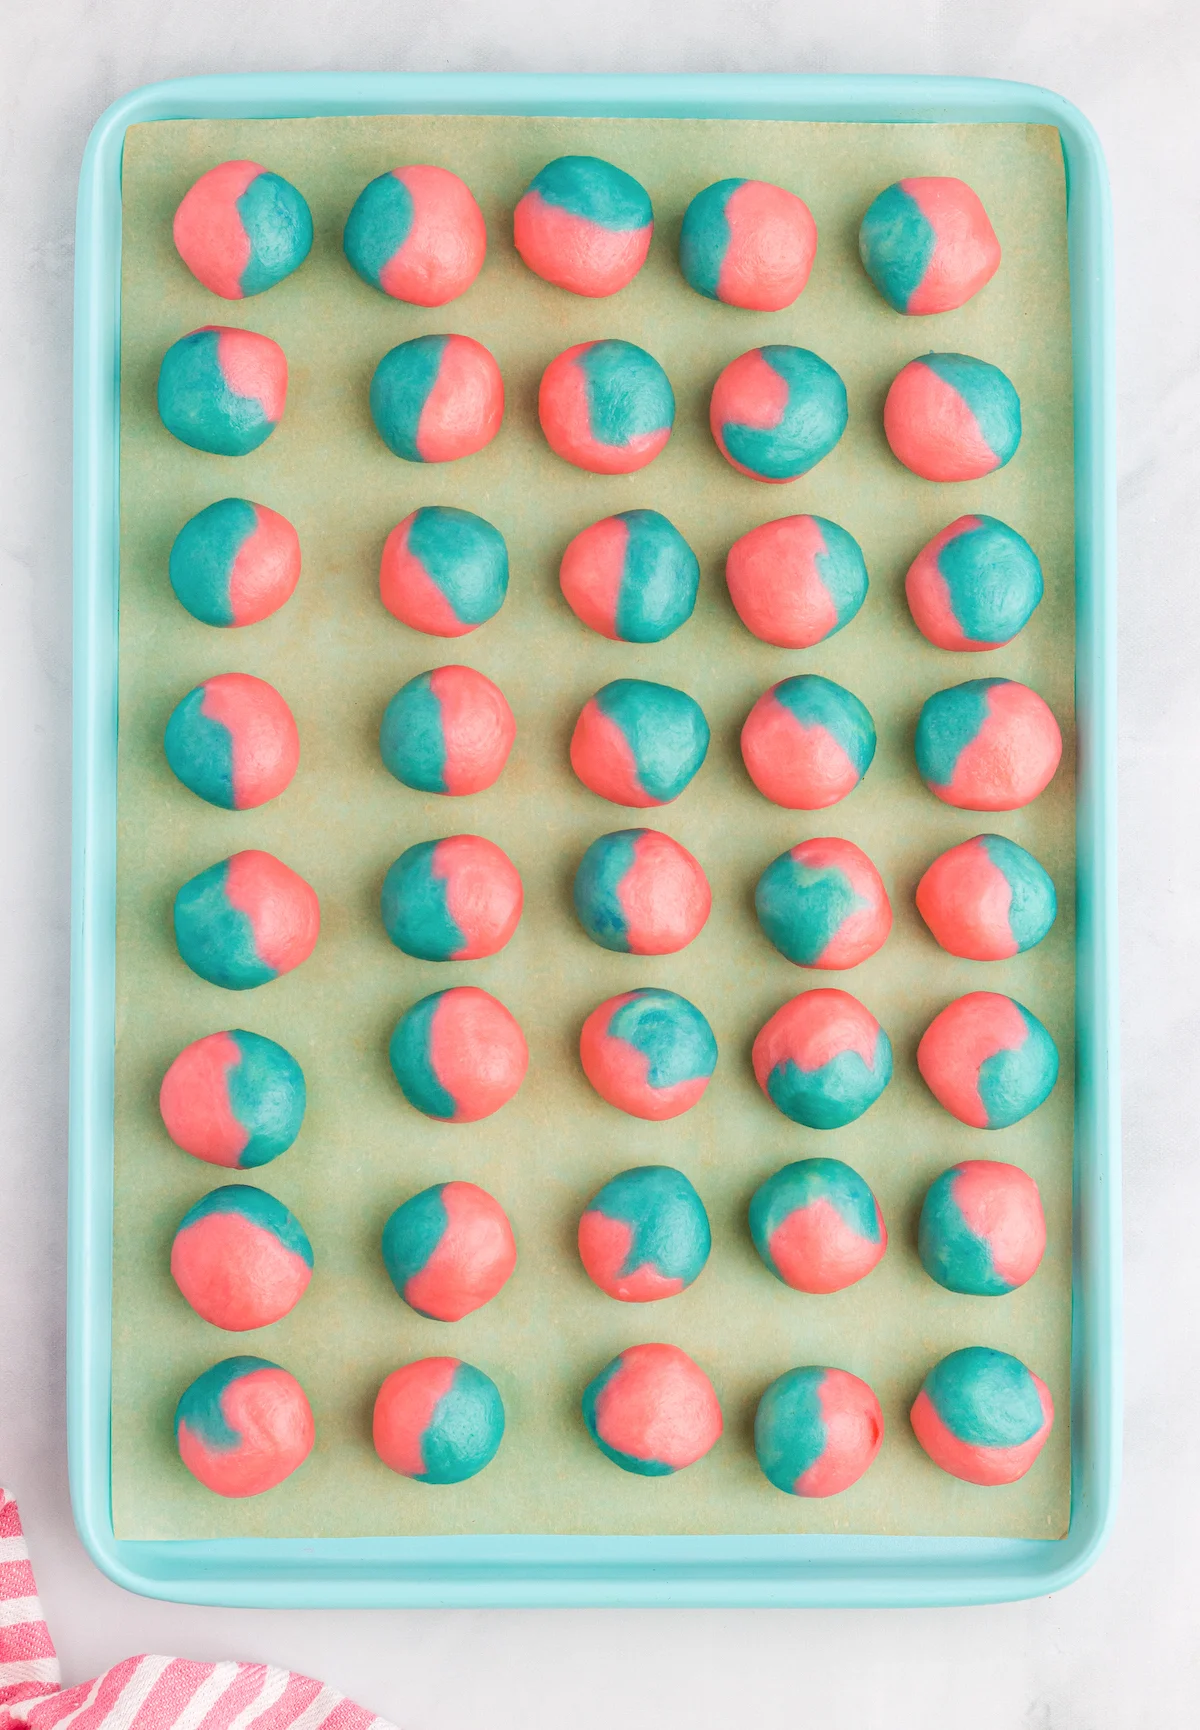 Pink and blue balls chilling on the baking mat